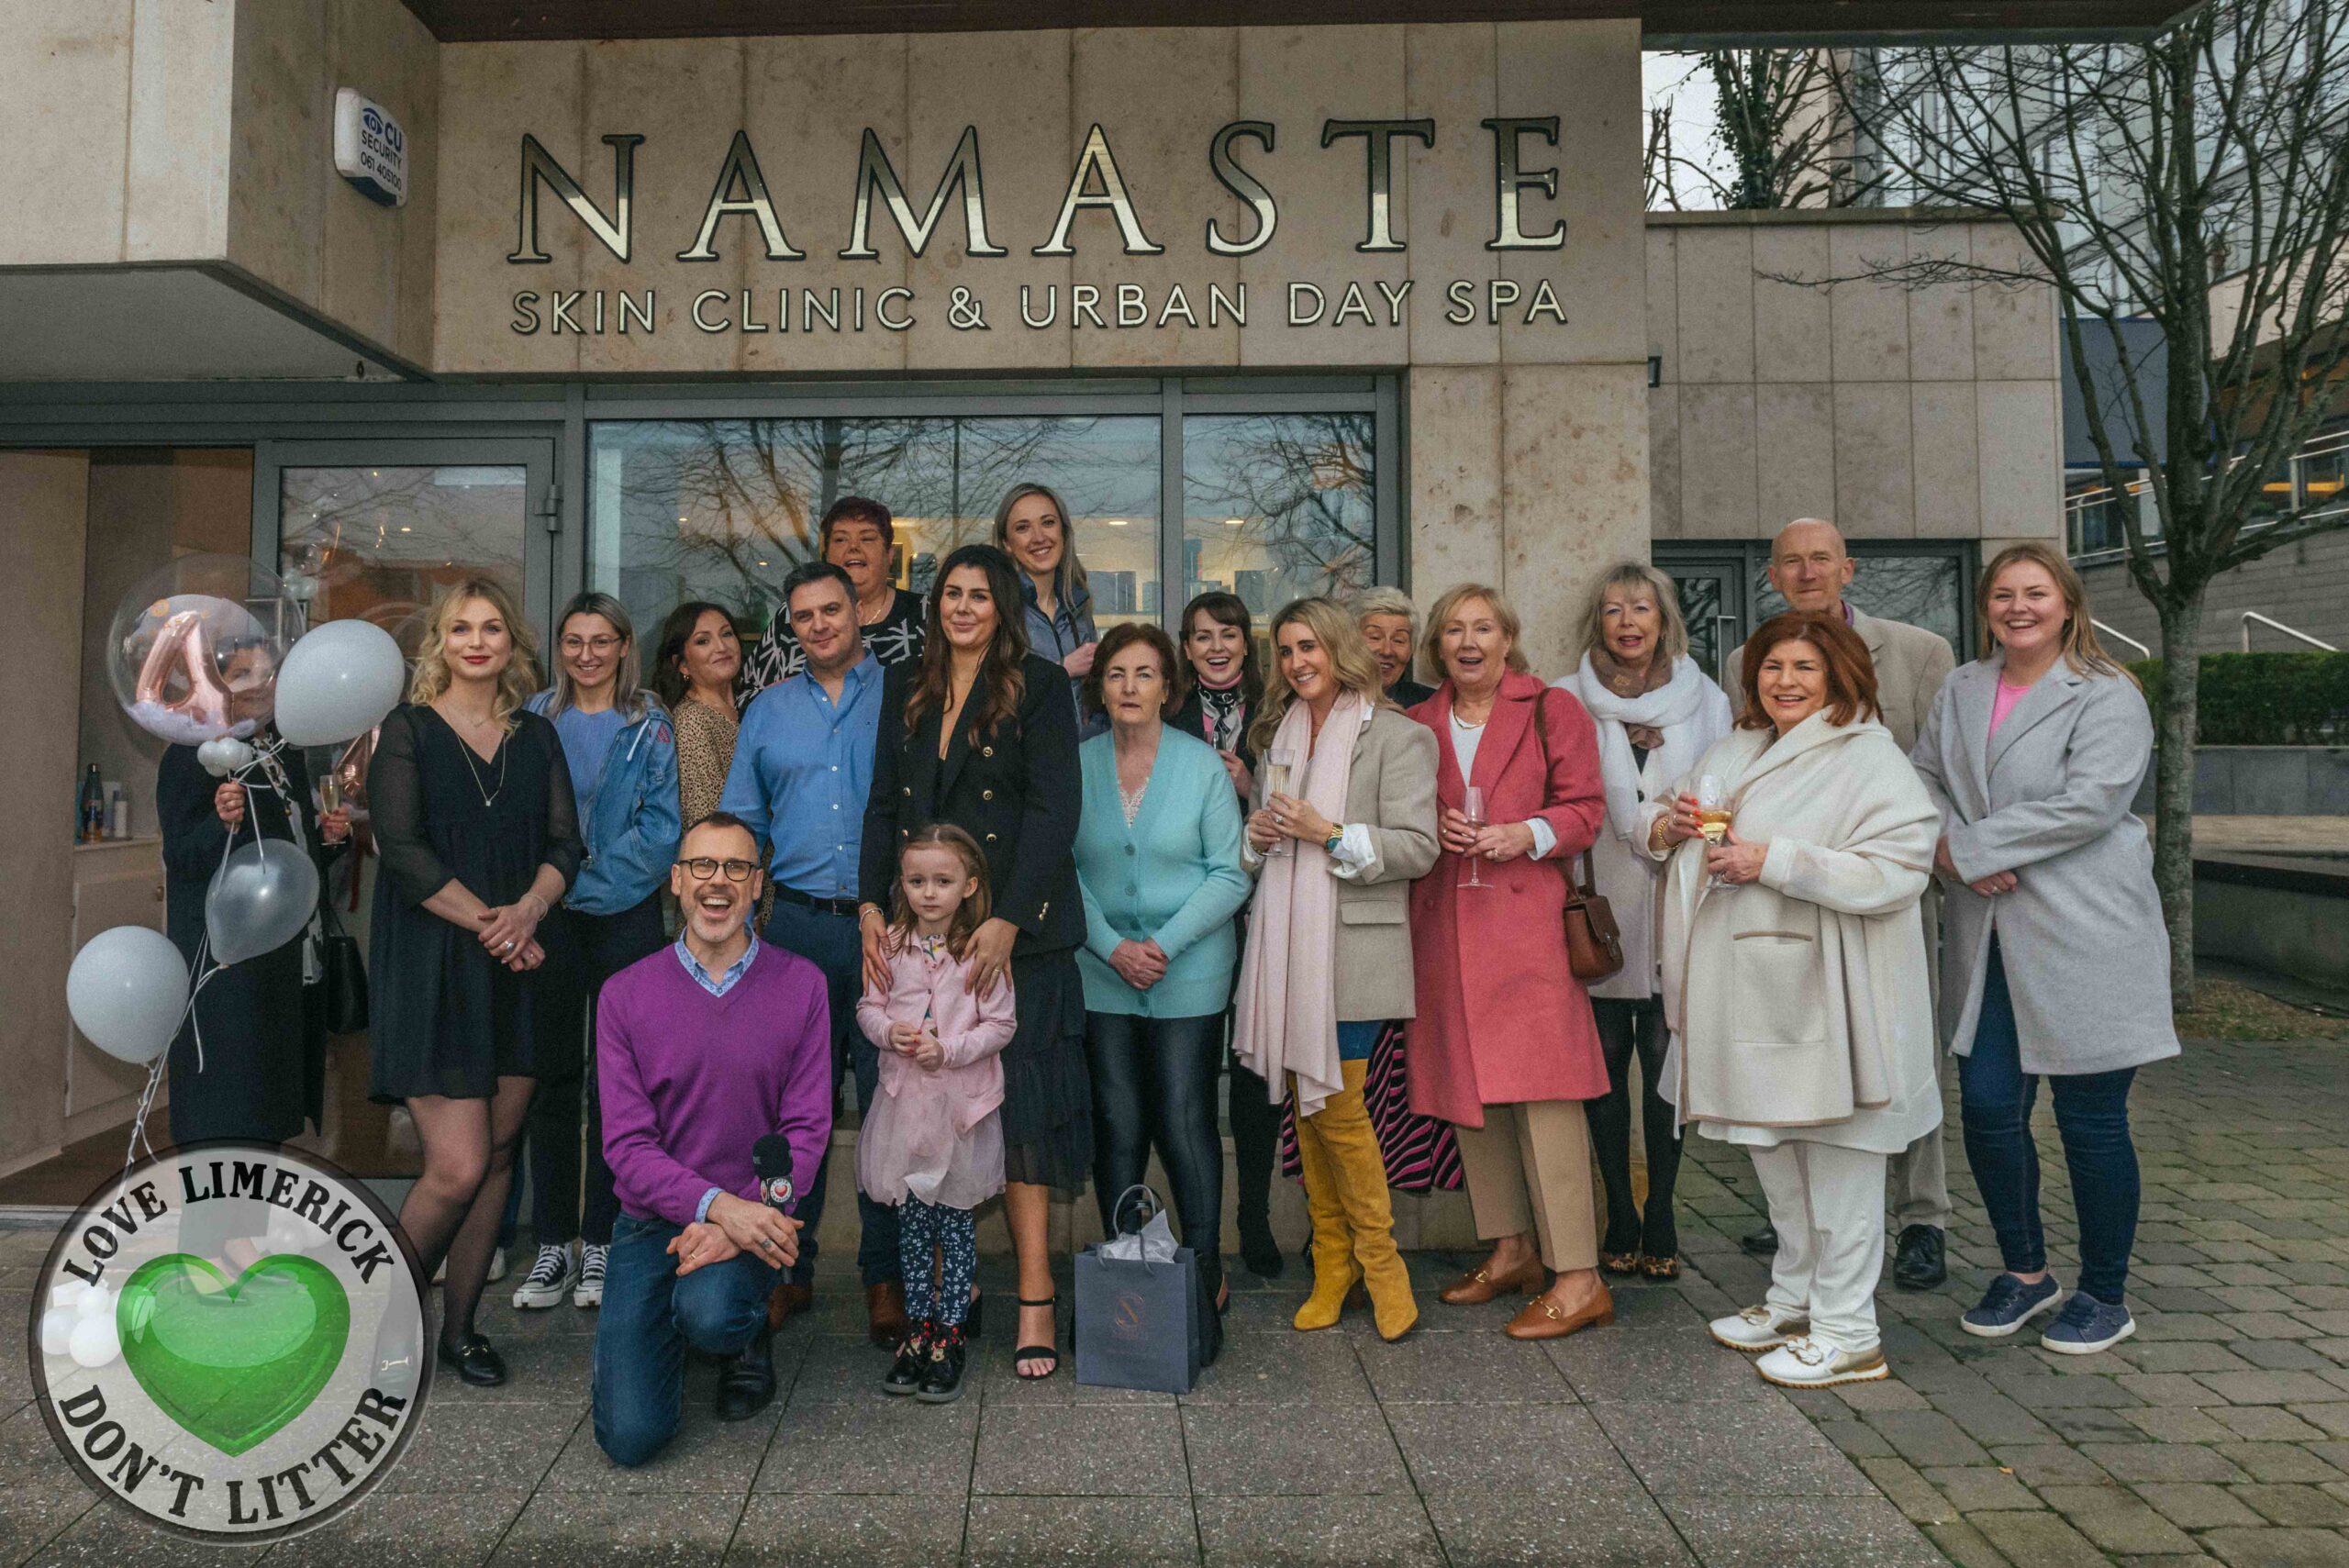 PHOTOS Namaste Skin Clinic & Urban Day Spa celebrates 4th birthday with a refurnished asthestic and new services